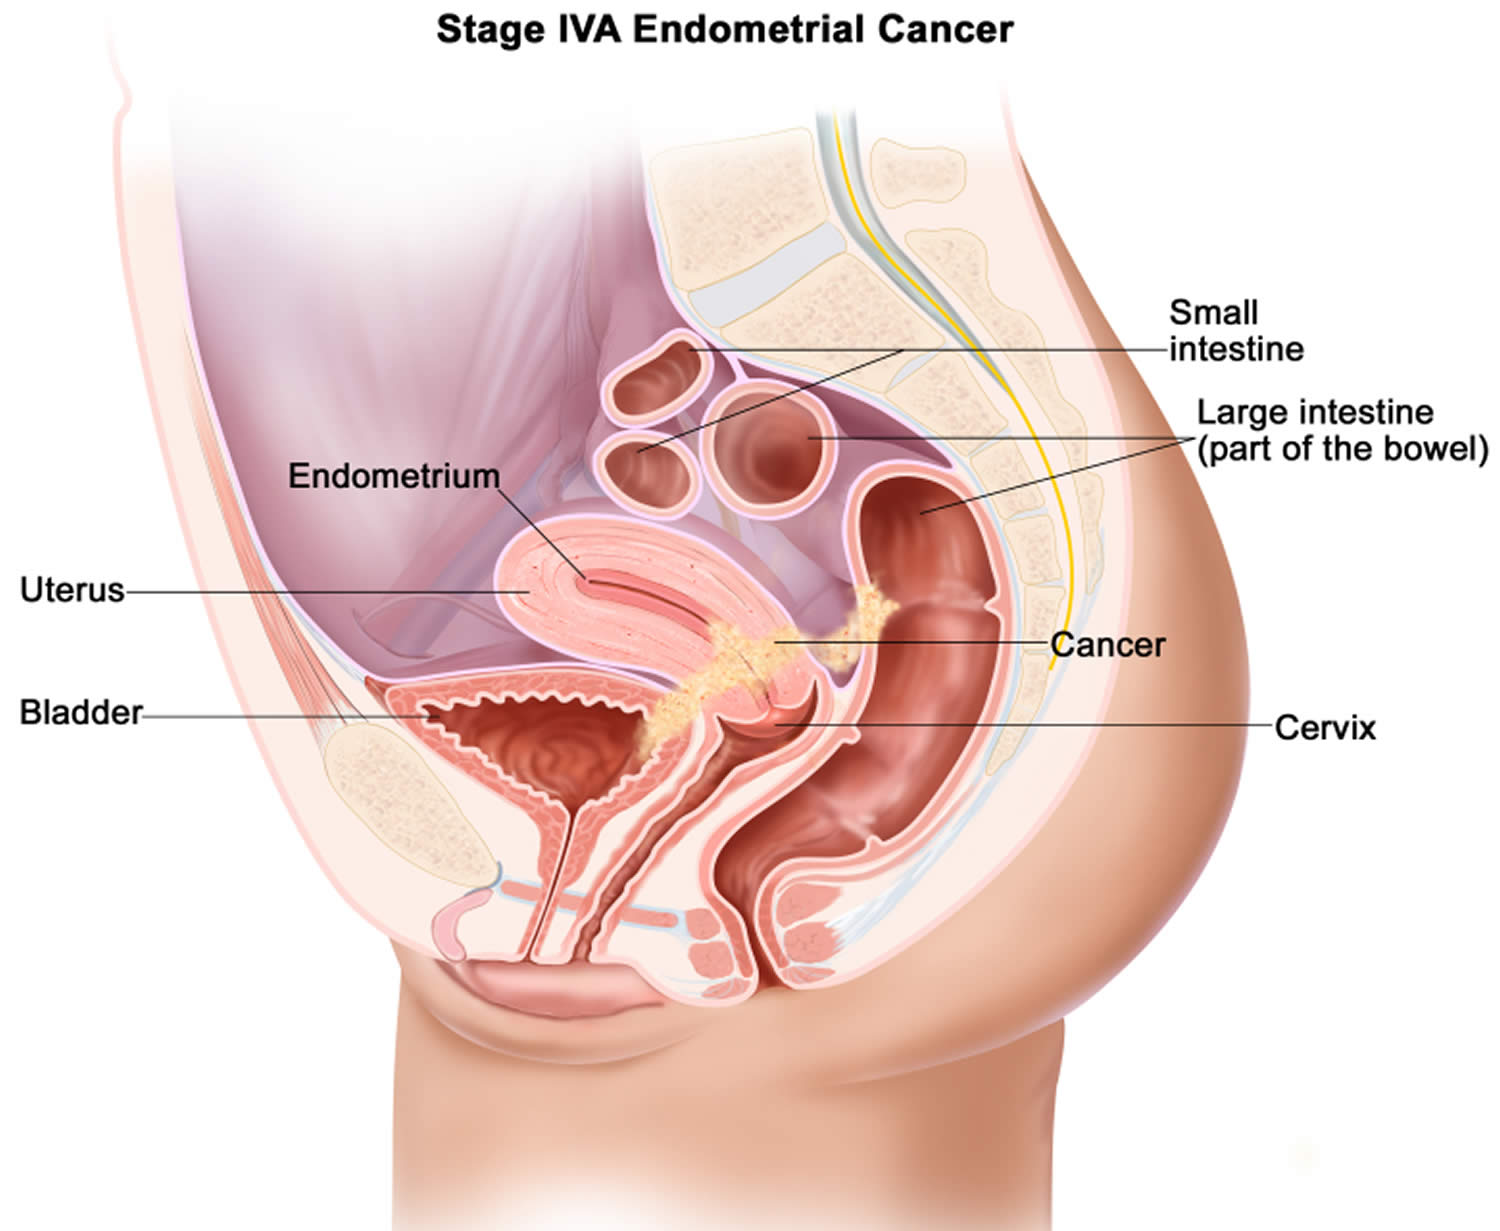 Stage 4A uterine cancer